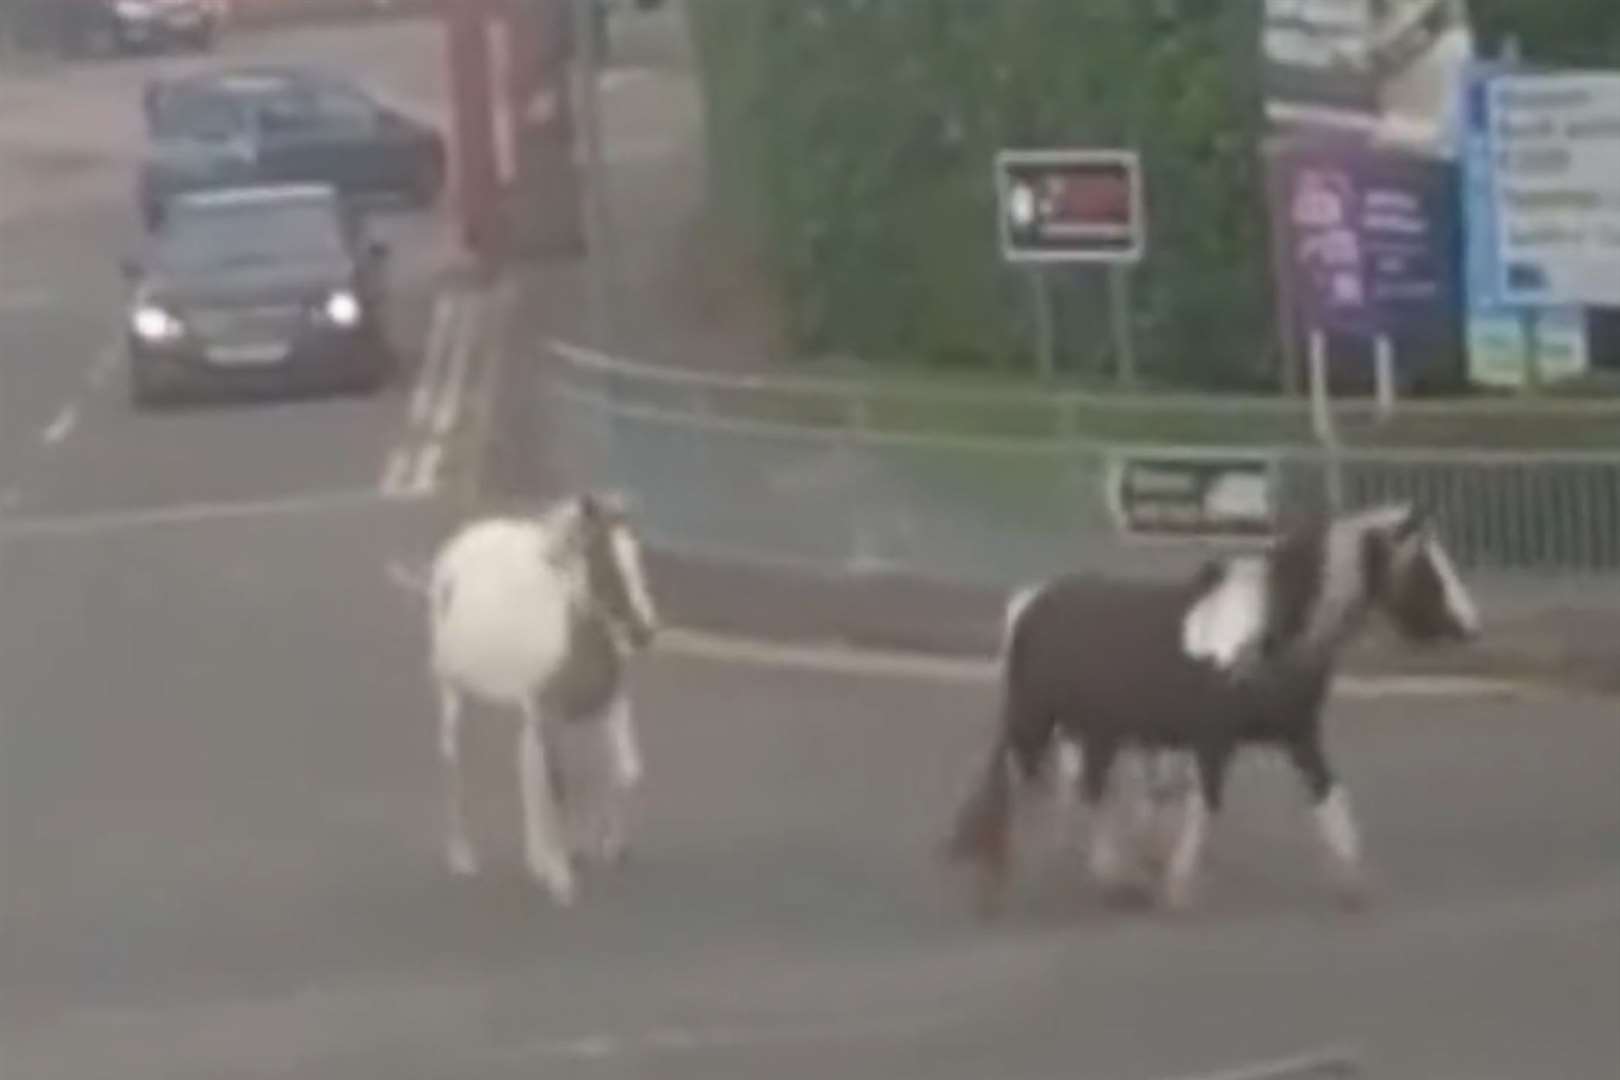 The horses leave the Beaver Business Park